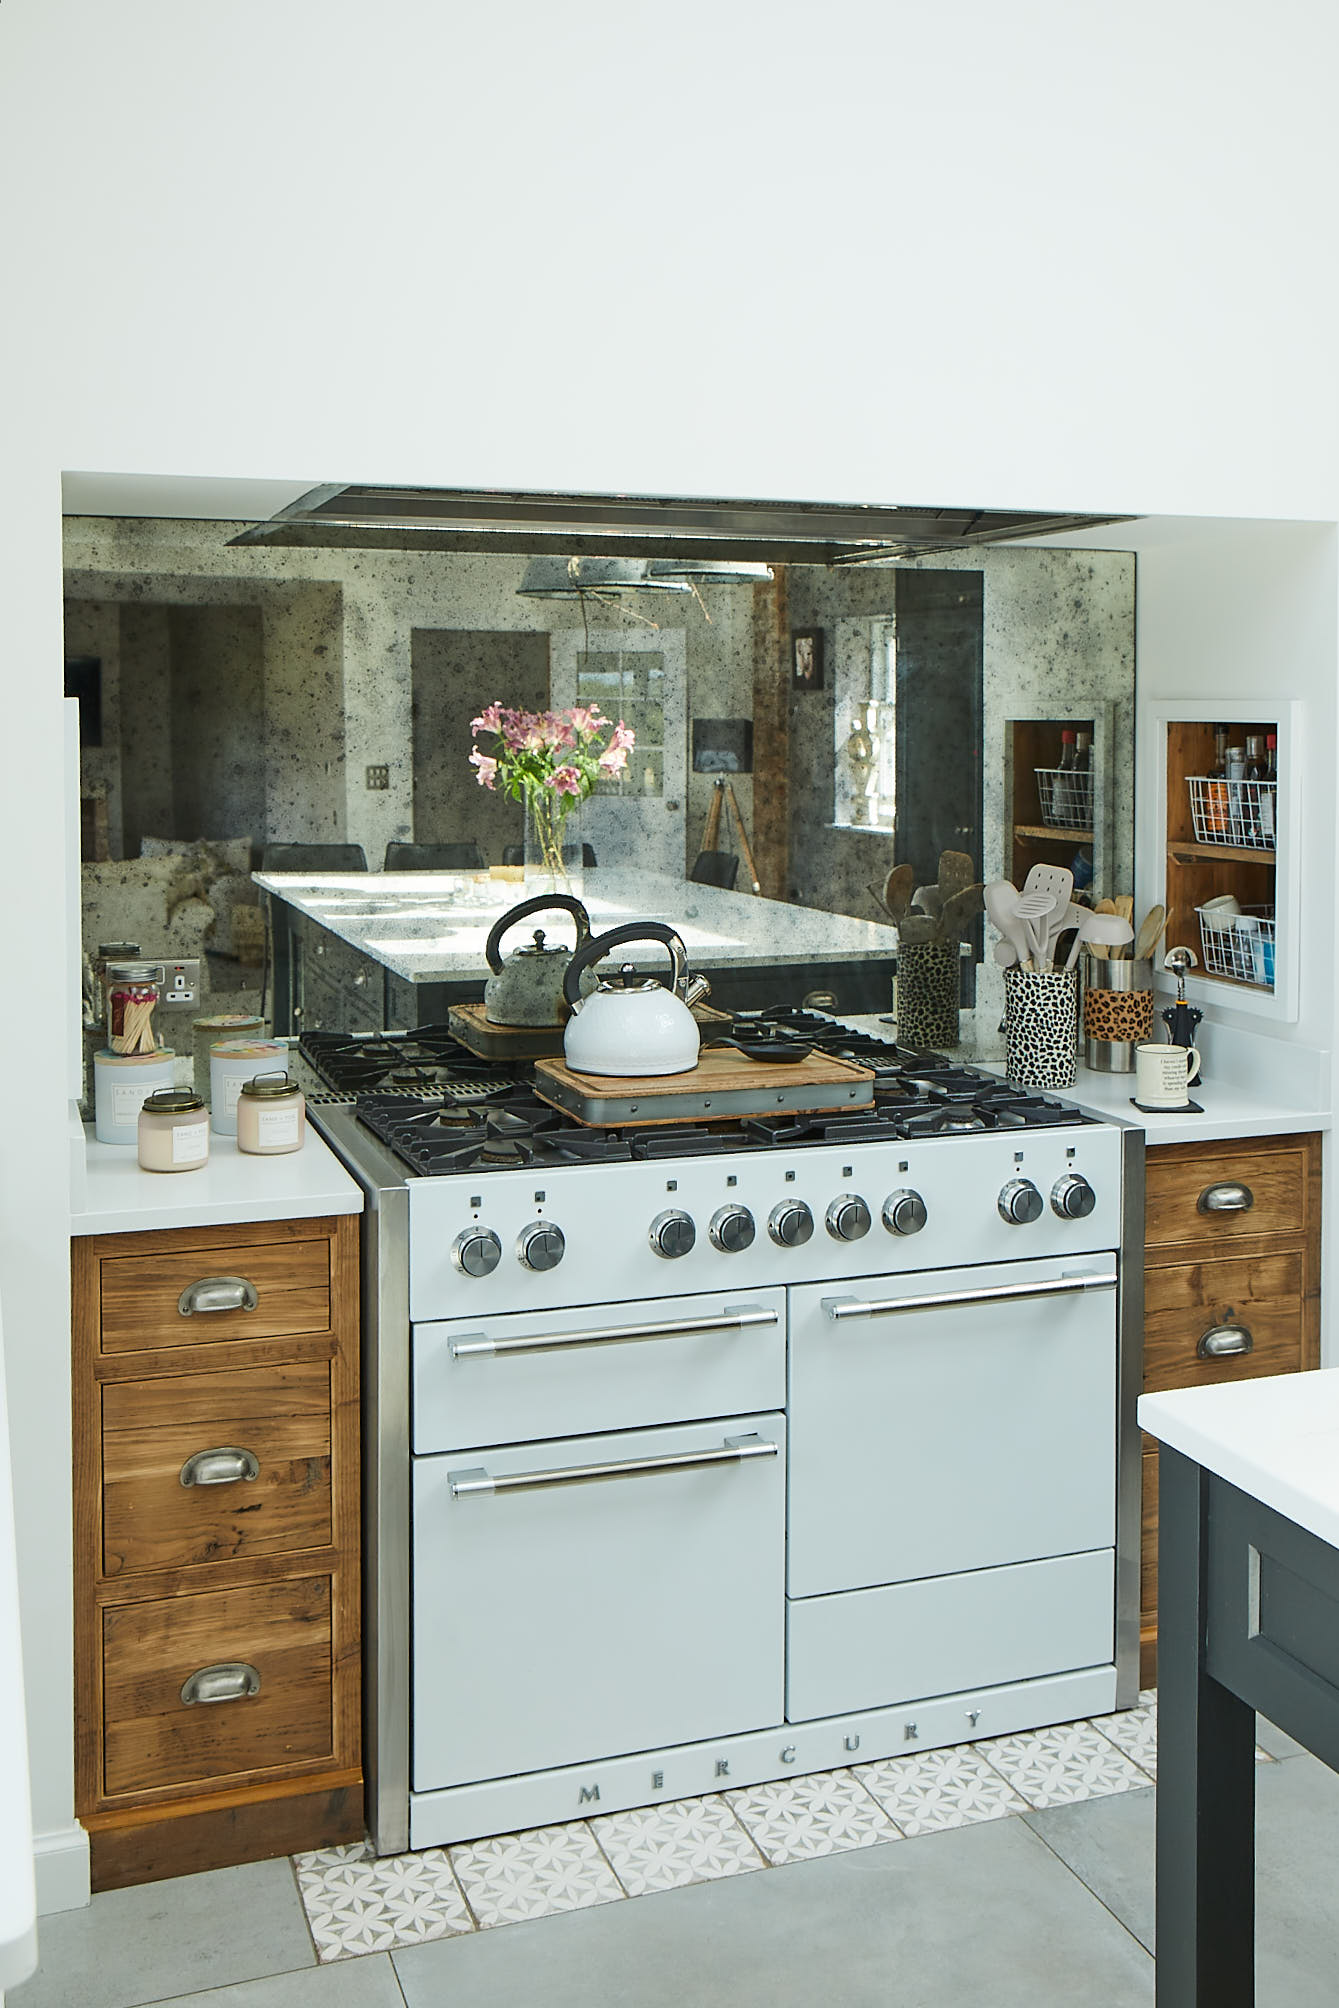 White Mercury cooker with rustic drawers left and right